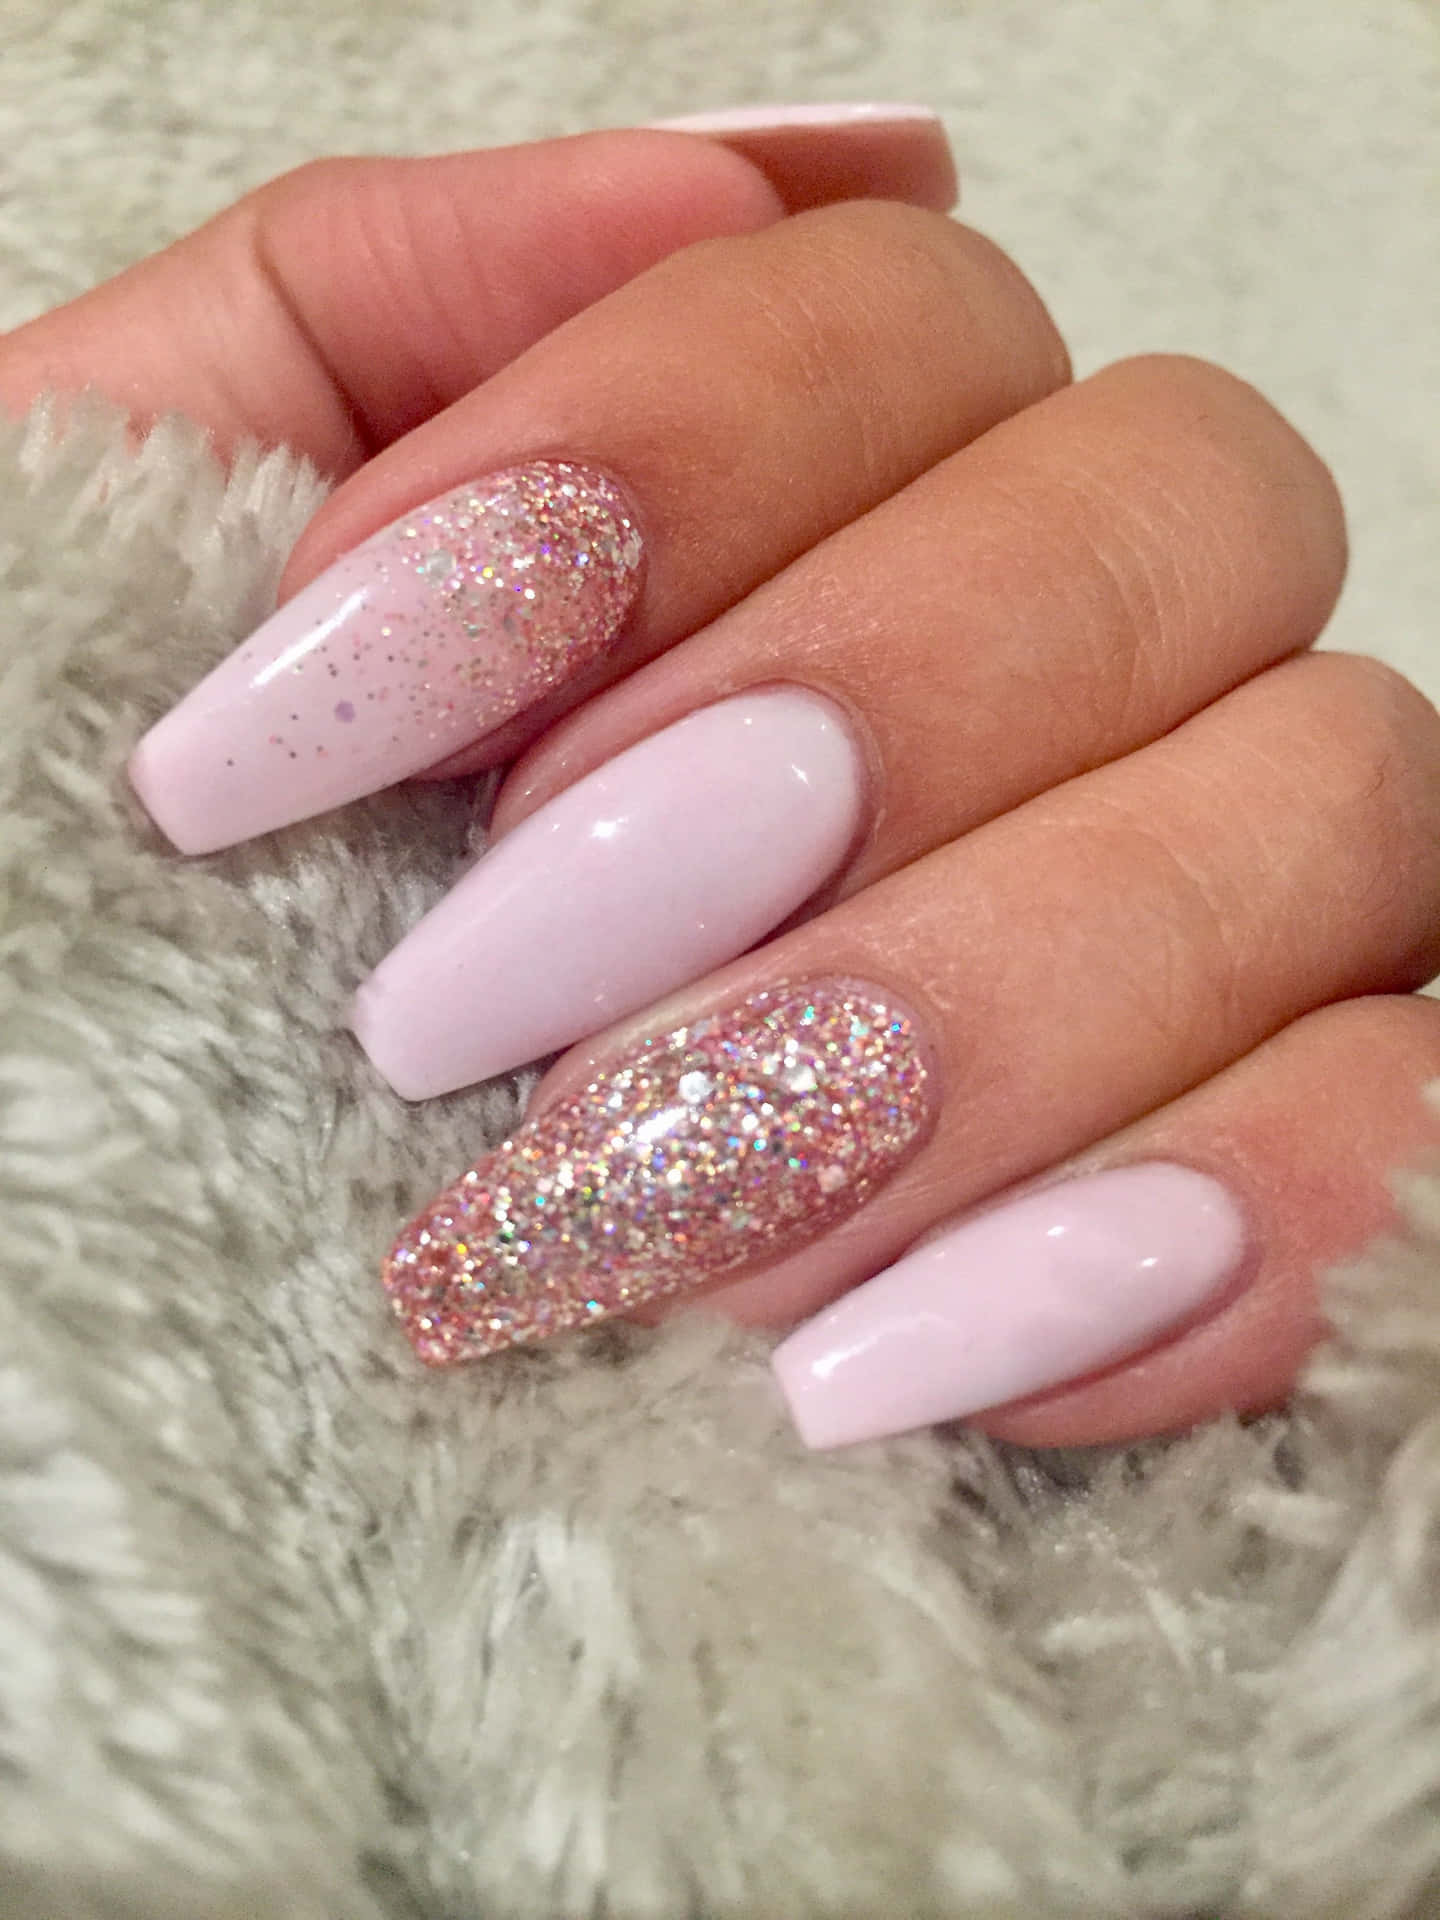 Adorable pink nail design on trendy almond-shaped nails Wallpaper